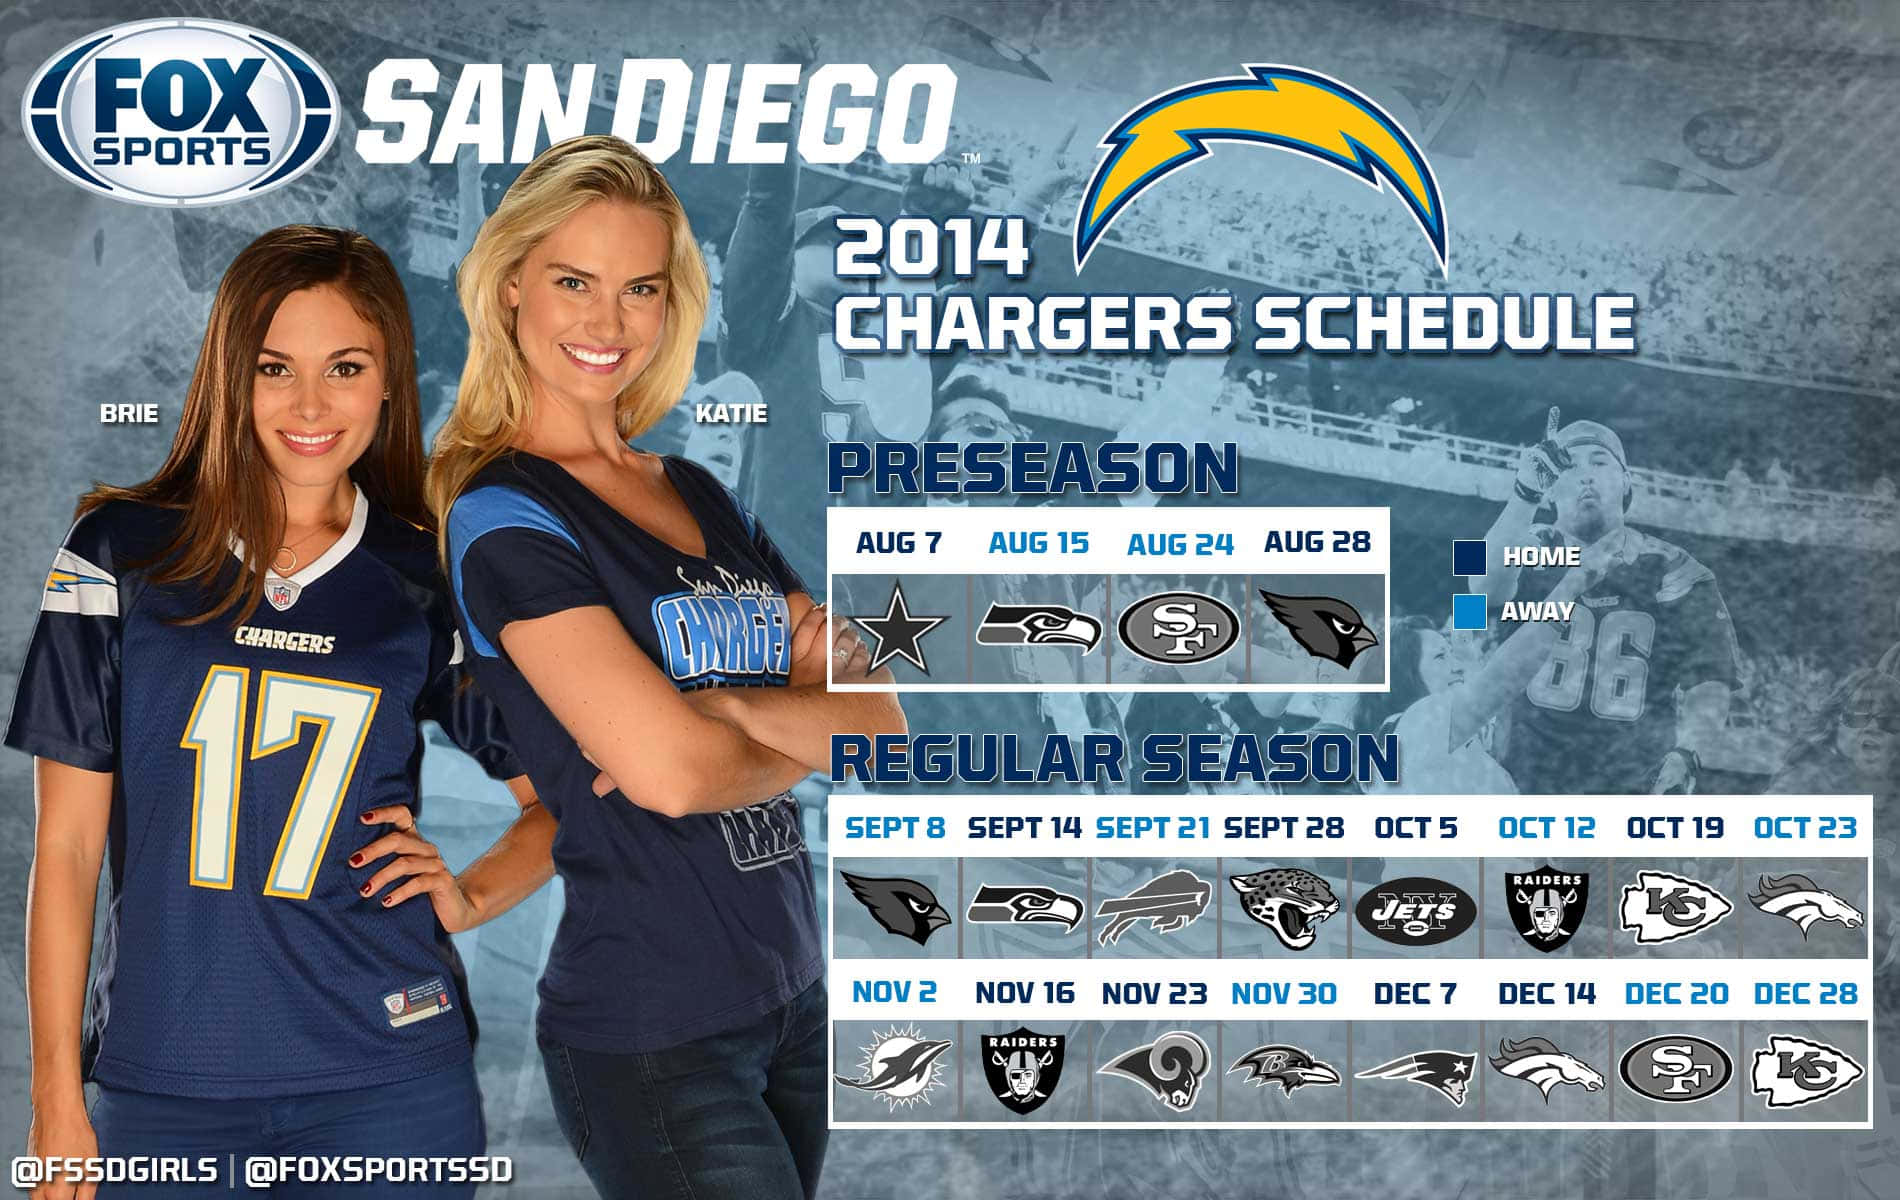 San Diego Chargers NFL Football Team Wallpaper